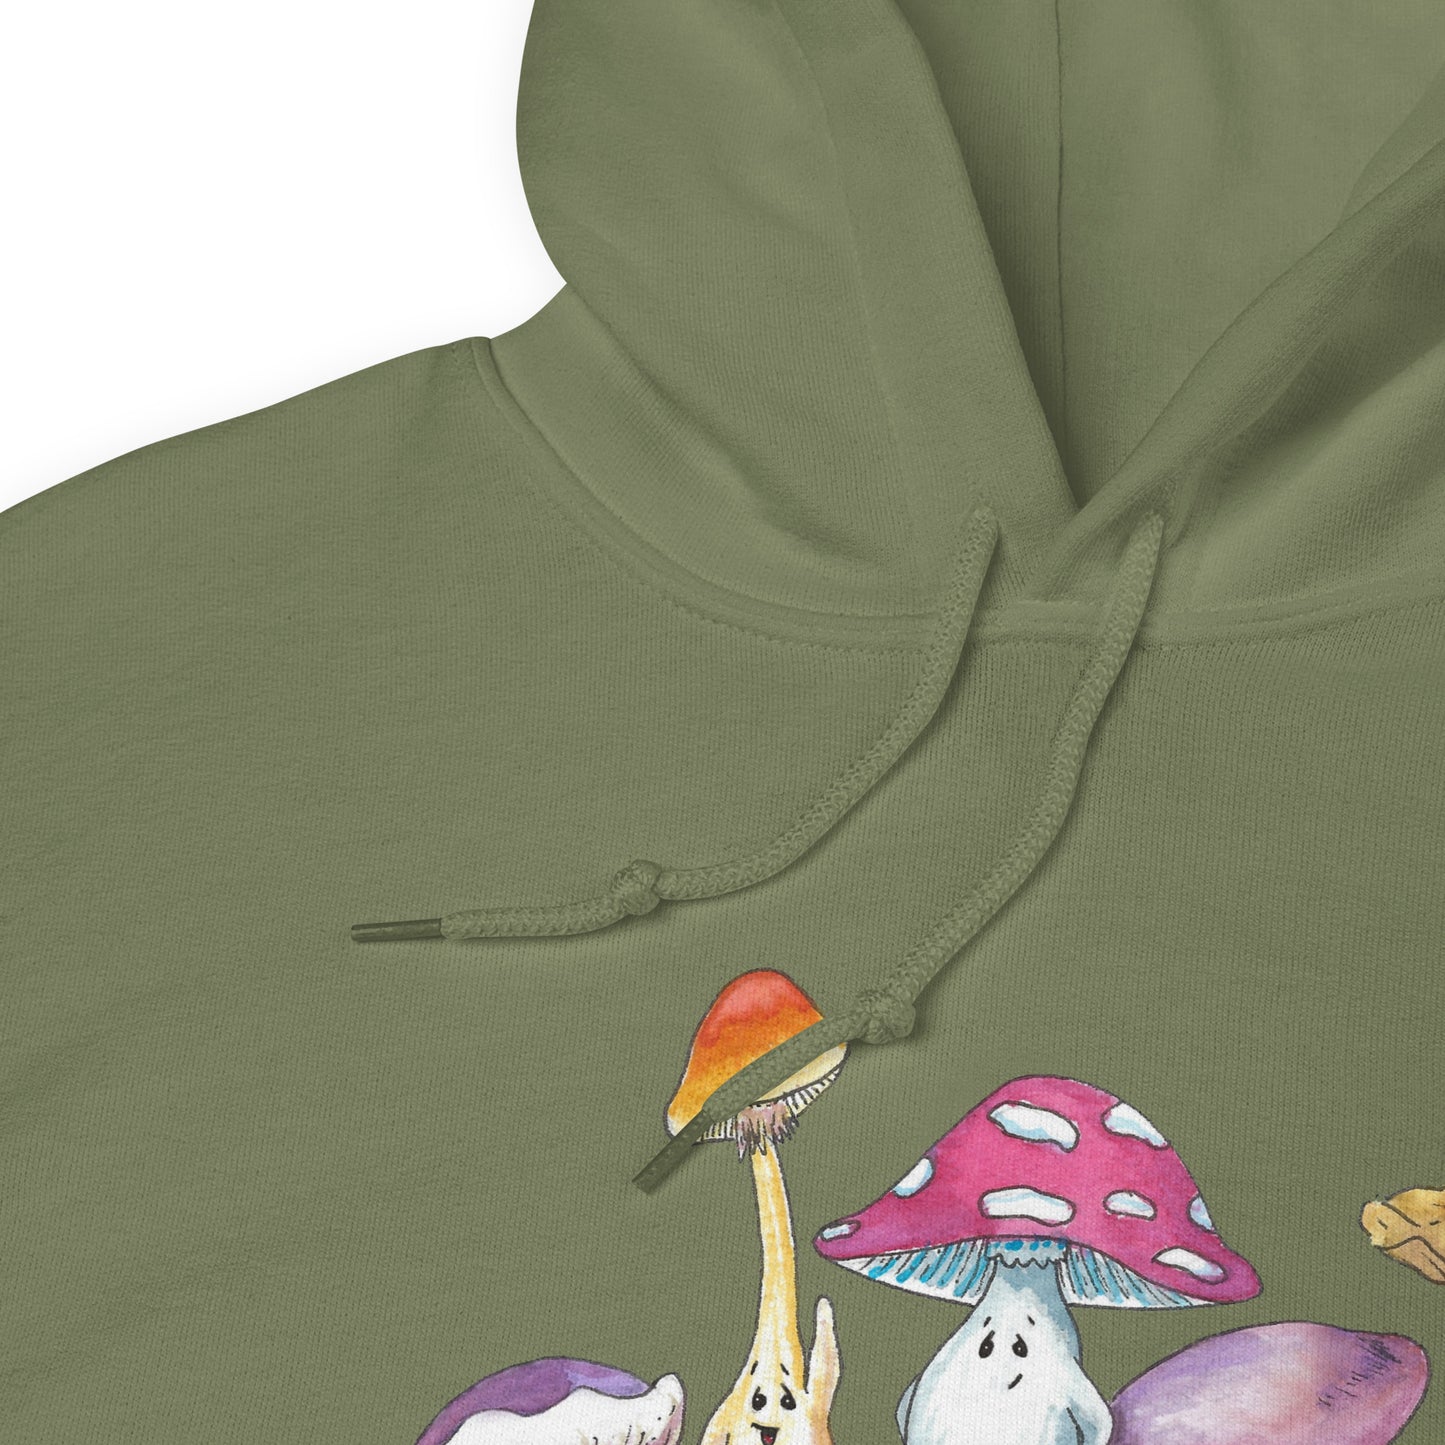 Military green colored unisex cotton/polyester blend hoodie. Features front design of Mushy and his whimsical mushroom friends. Hoodie has double lined hood, front pouch pocket, rib knit cuffs and stretchy waistband. Image shows detail view of drawstrings and hood.